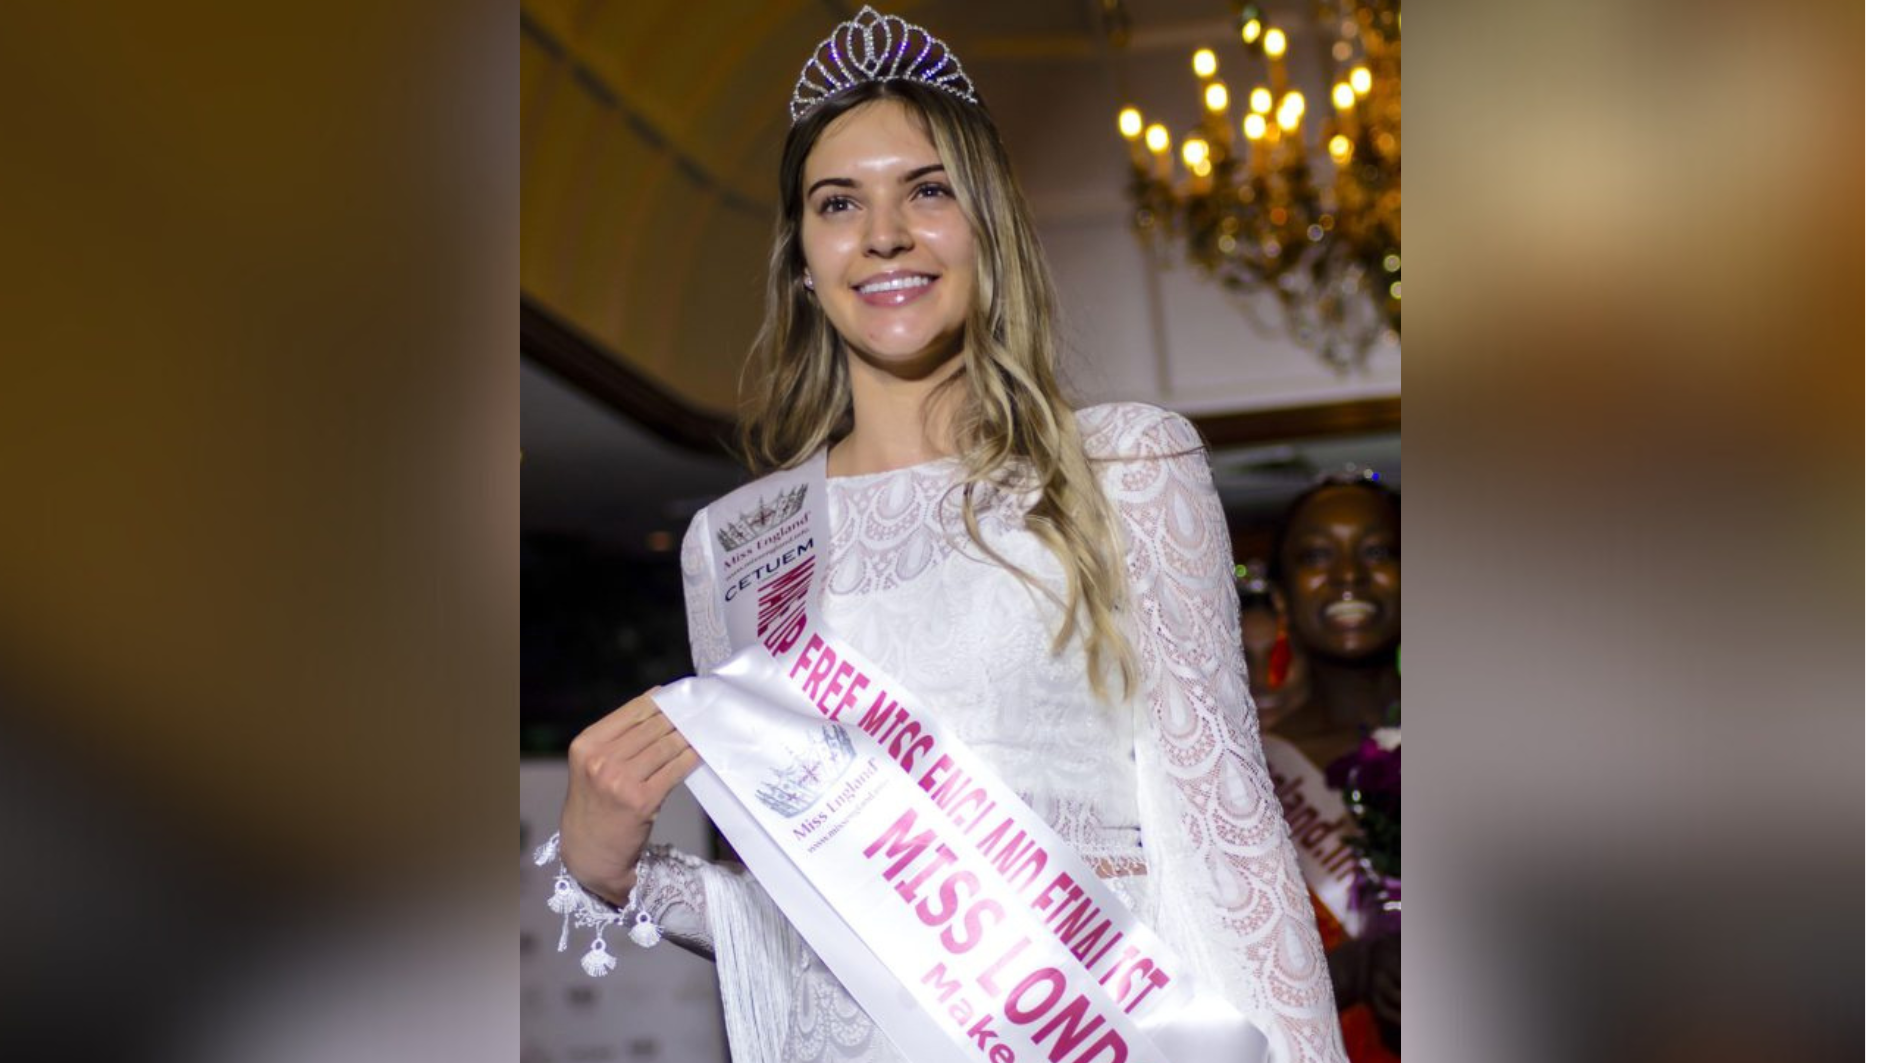 A No-Makeup Model Just Became A Miss England Pageant Finalist